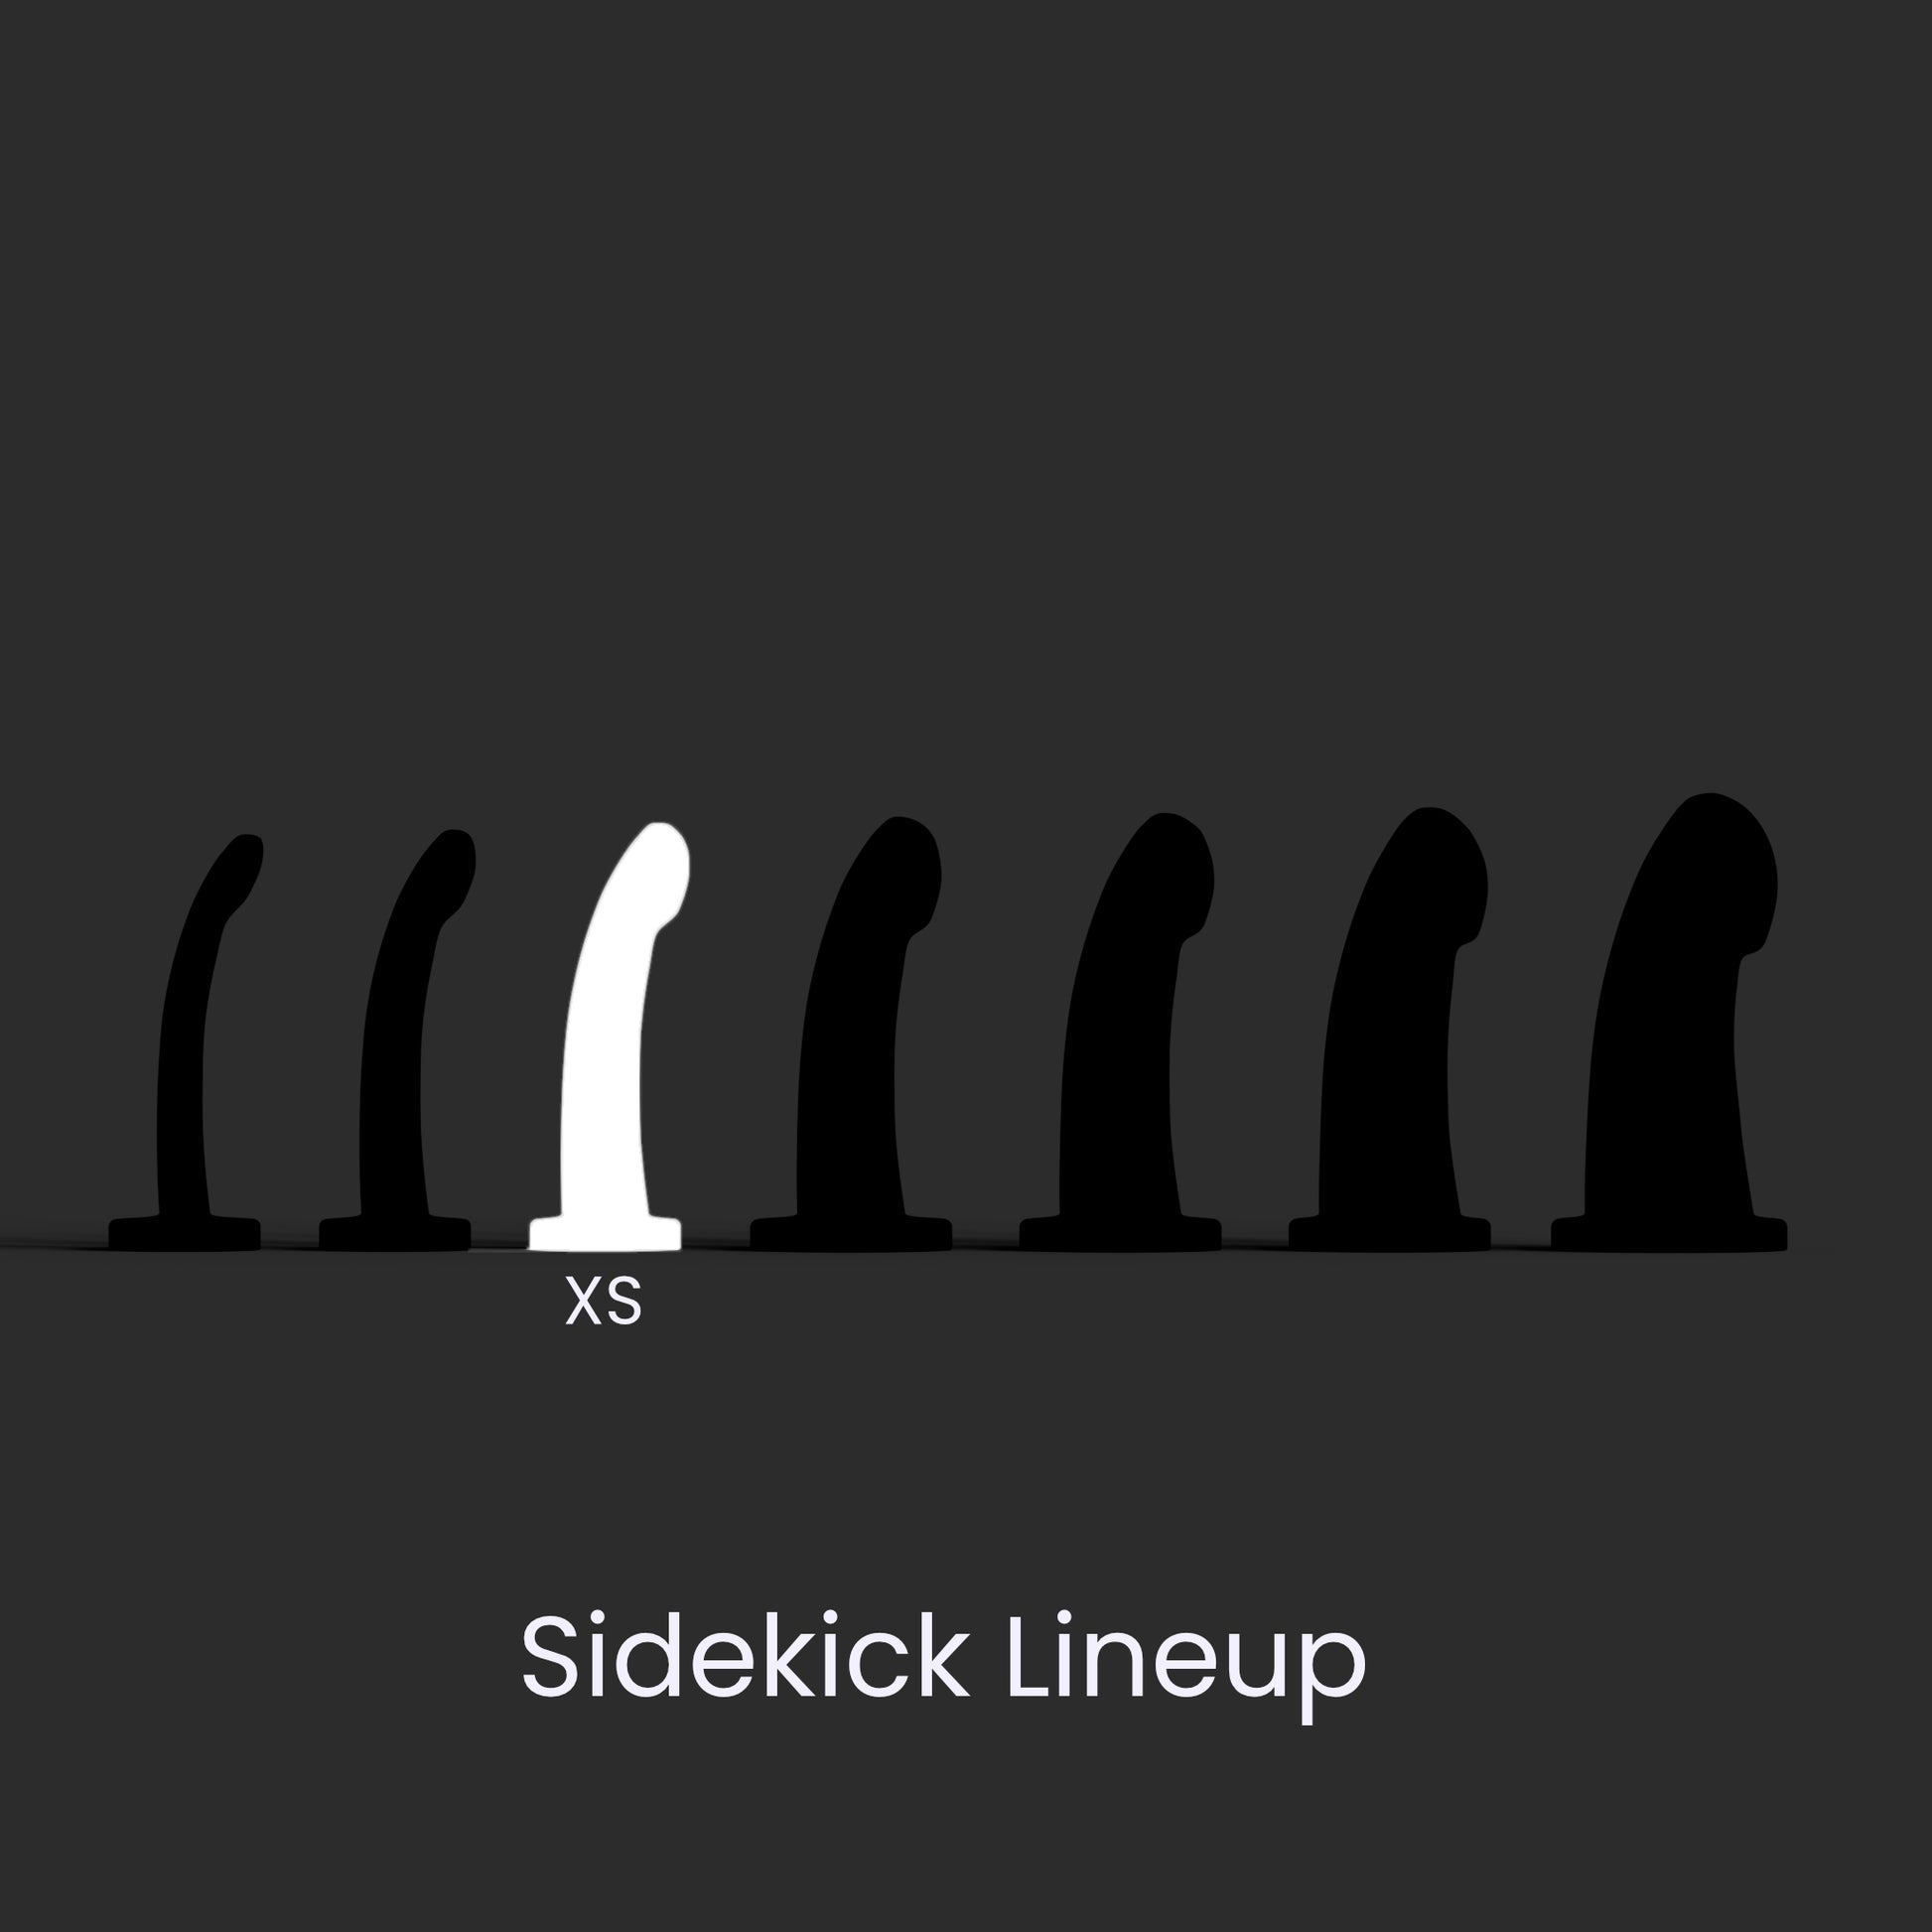 Diagram showing the seven Sidekick models lined up left to right smallest to largest, and the Extra Small in the third position.